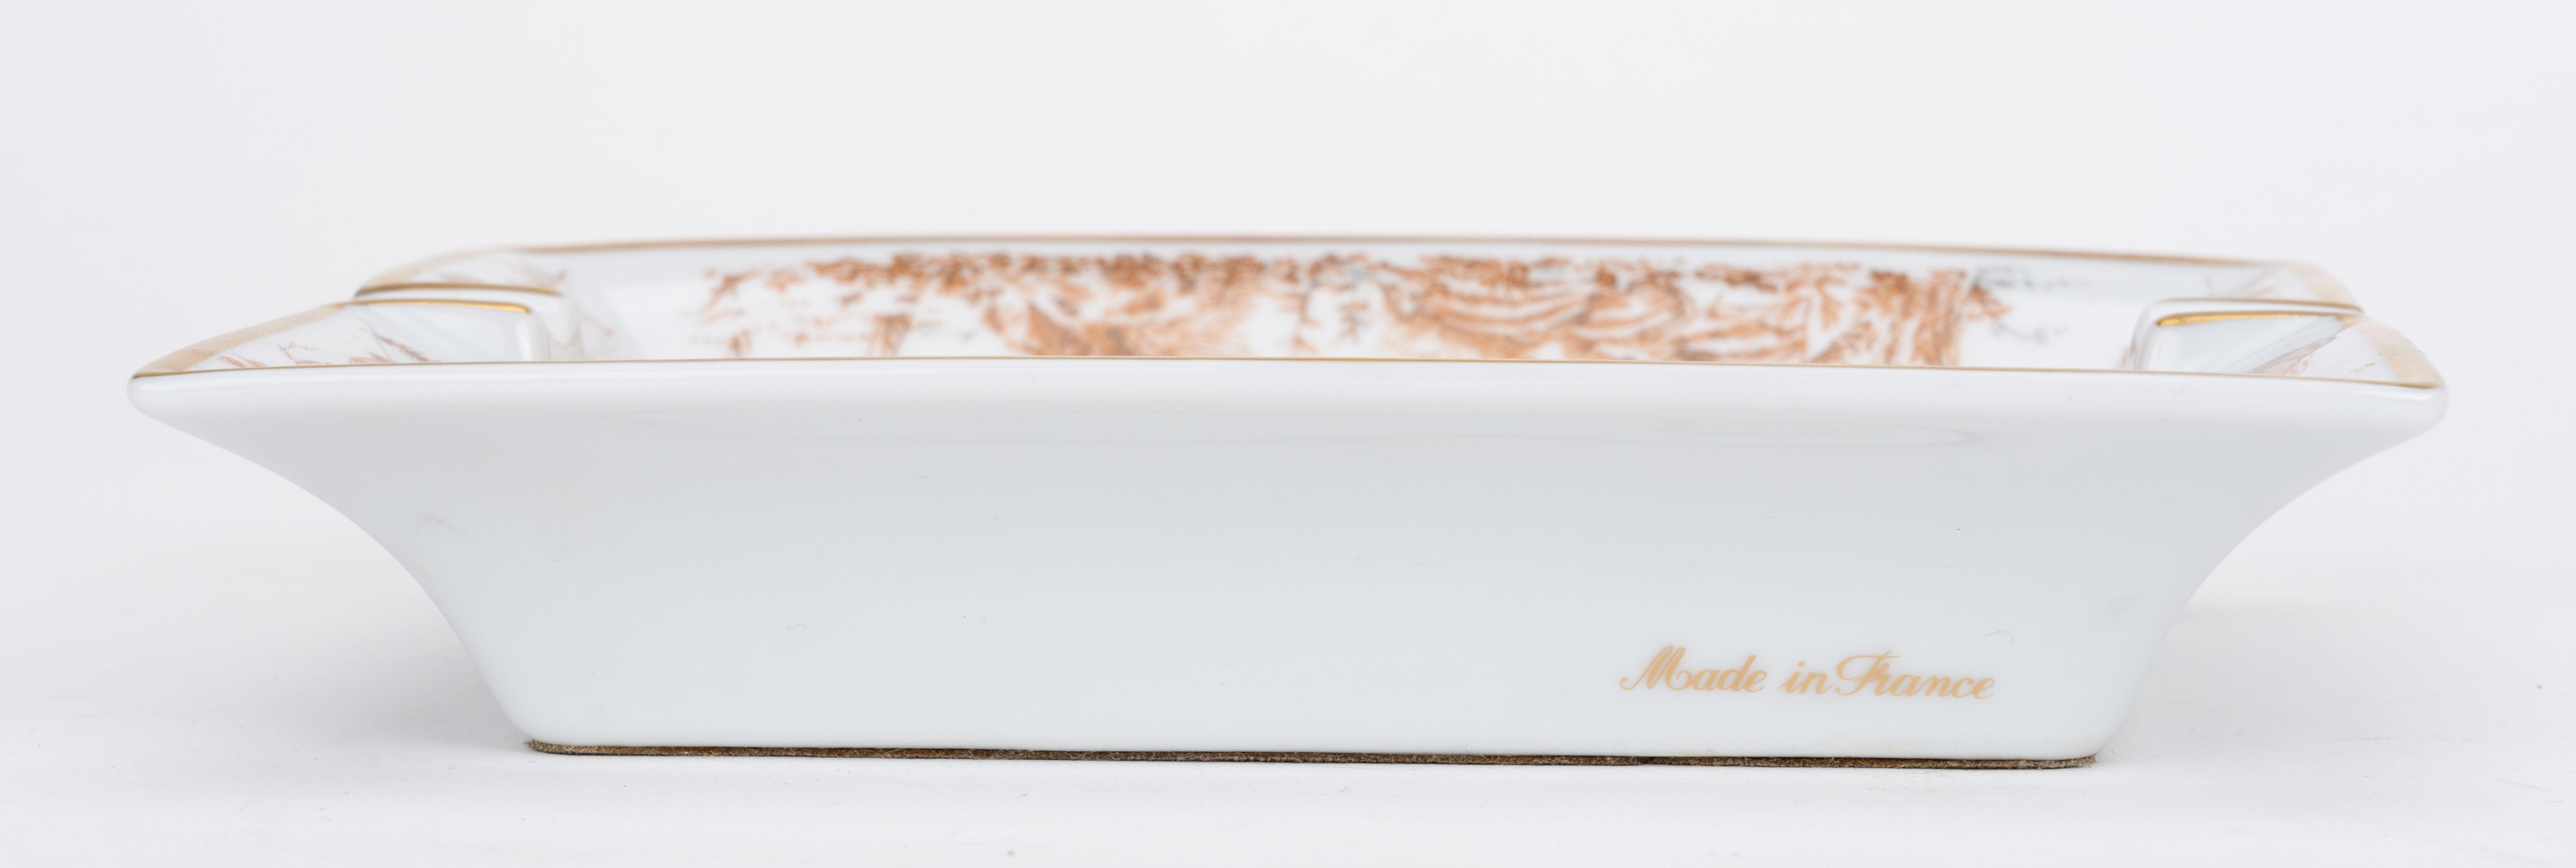 Hermès gold and white porcelain ashtray with wild boar design. Minor wear on back suede.